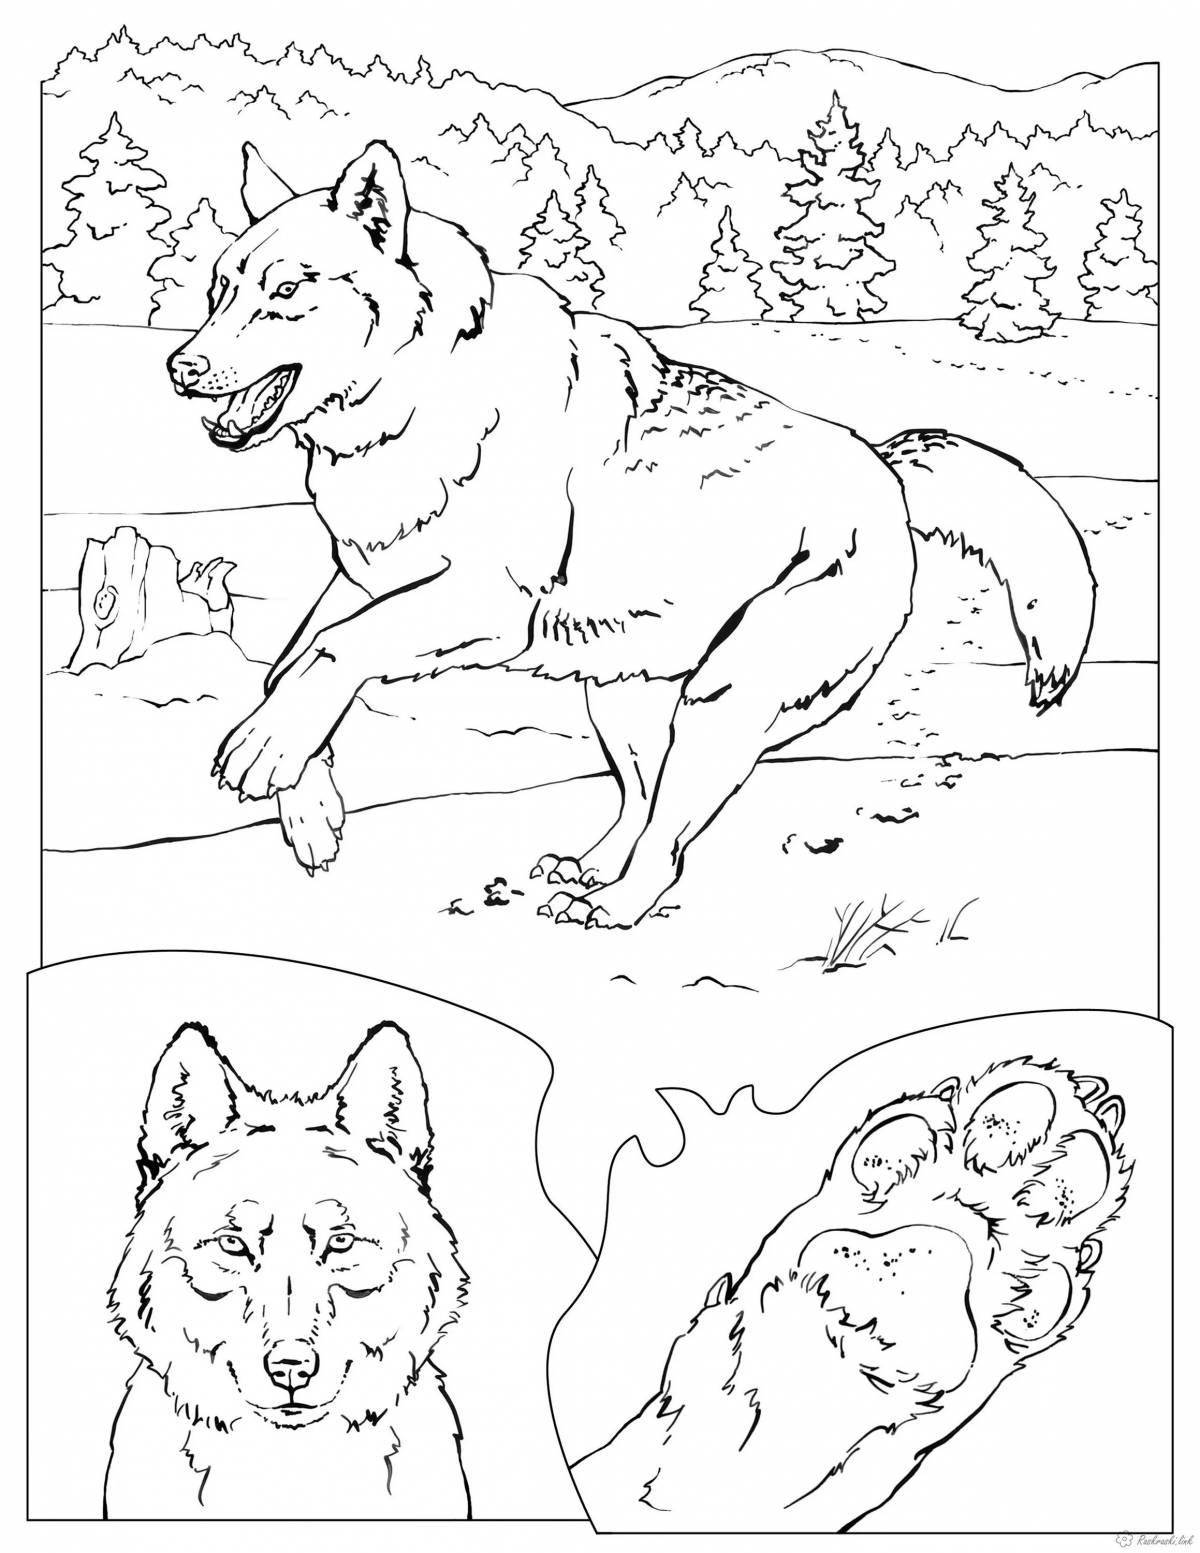 Exquisite wolf coloring book for kids